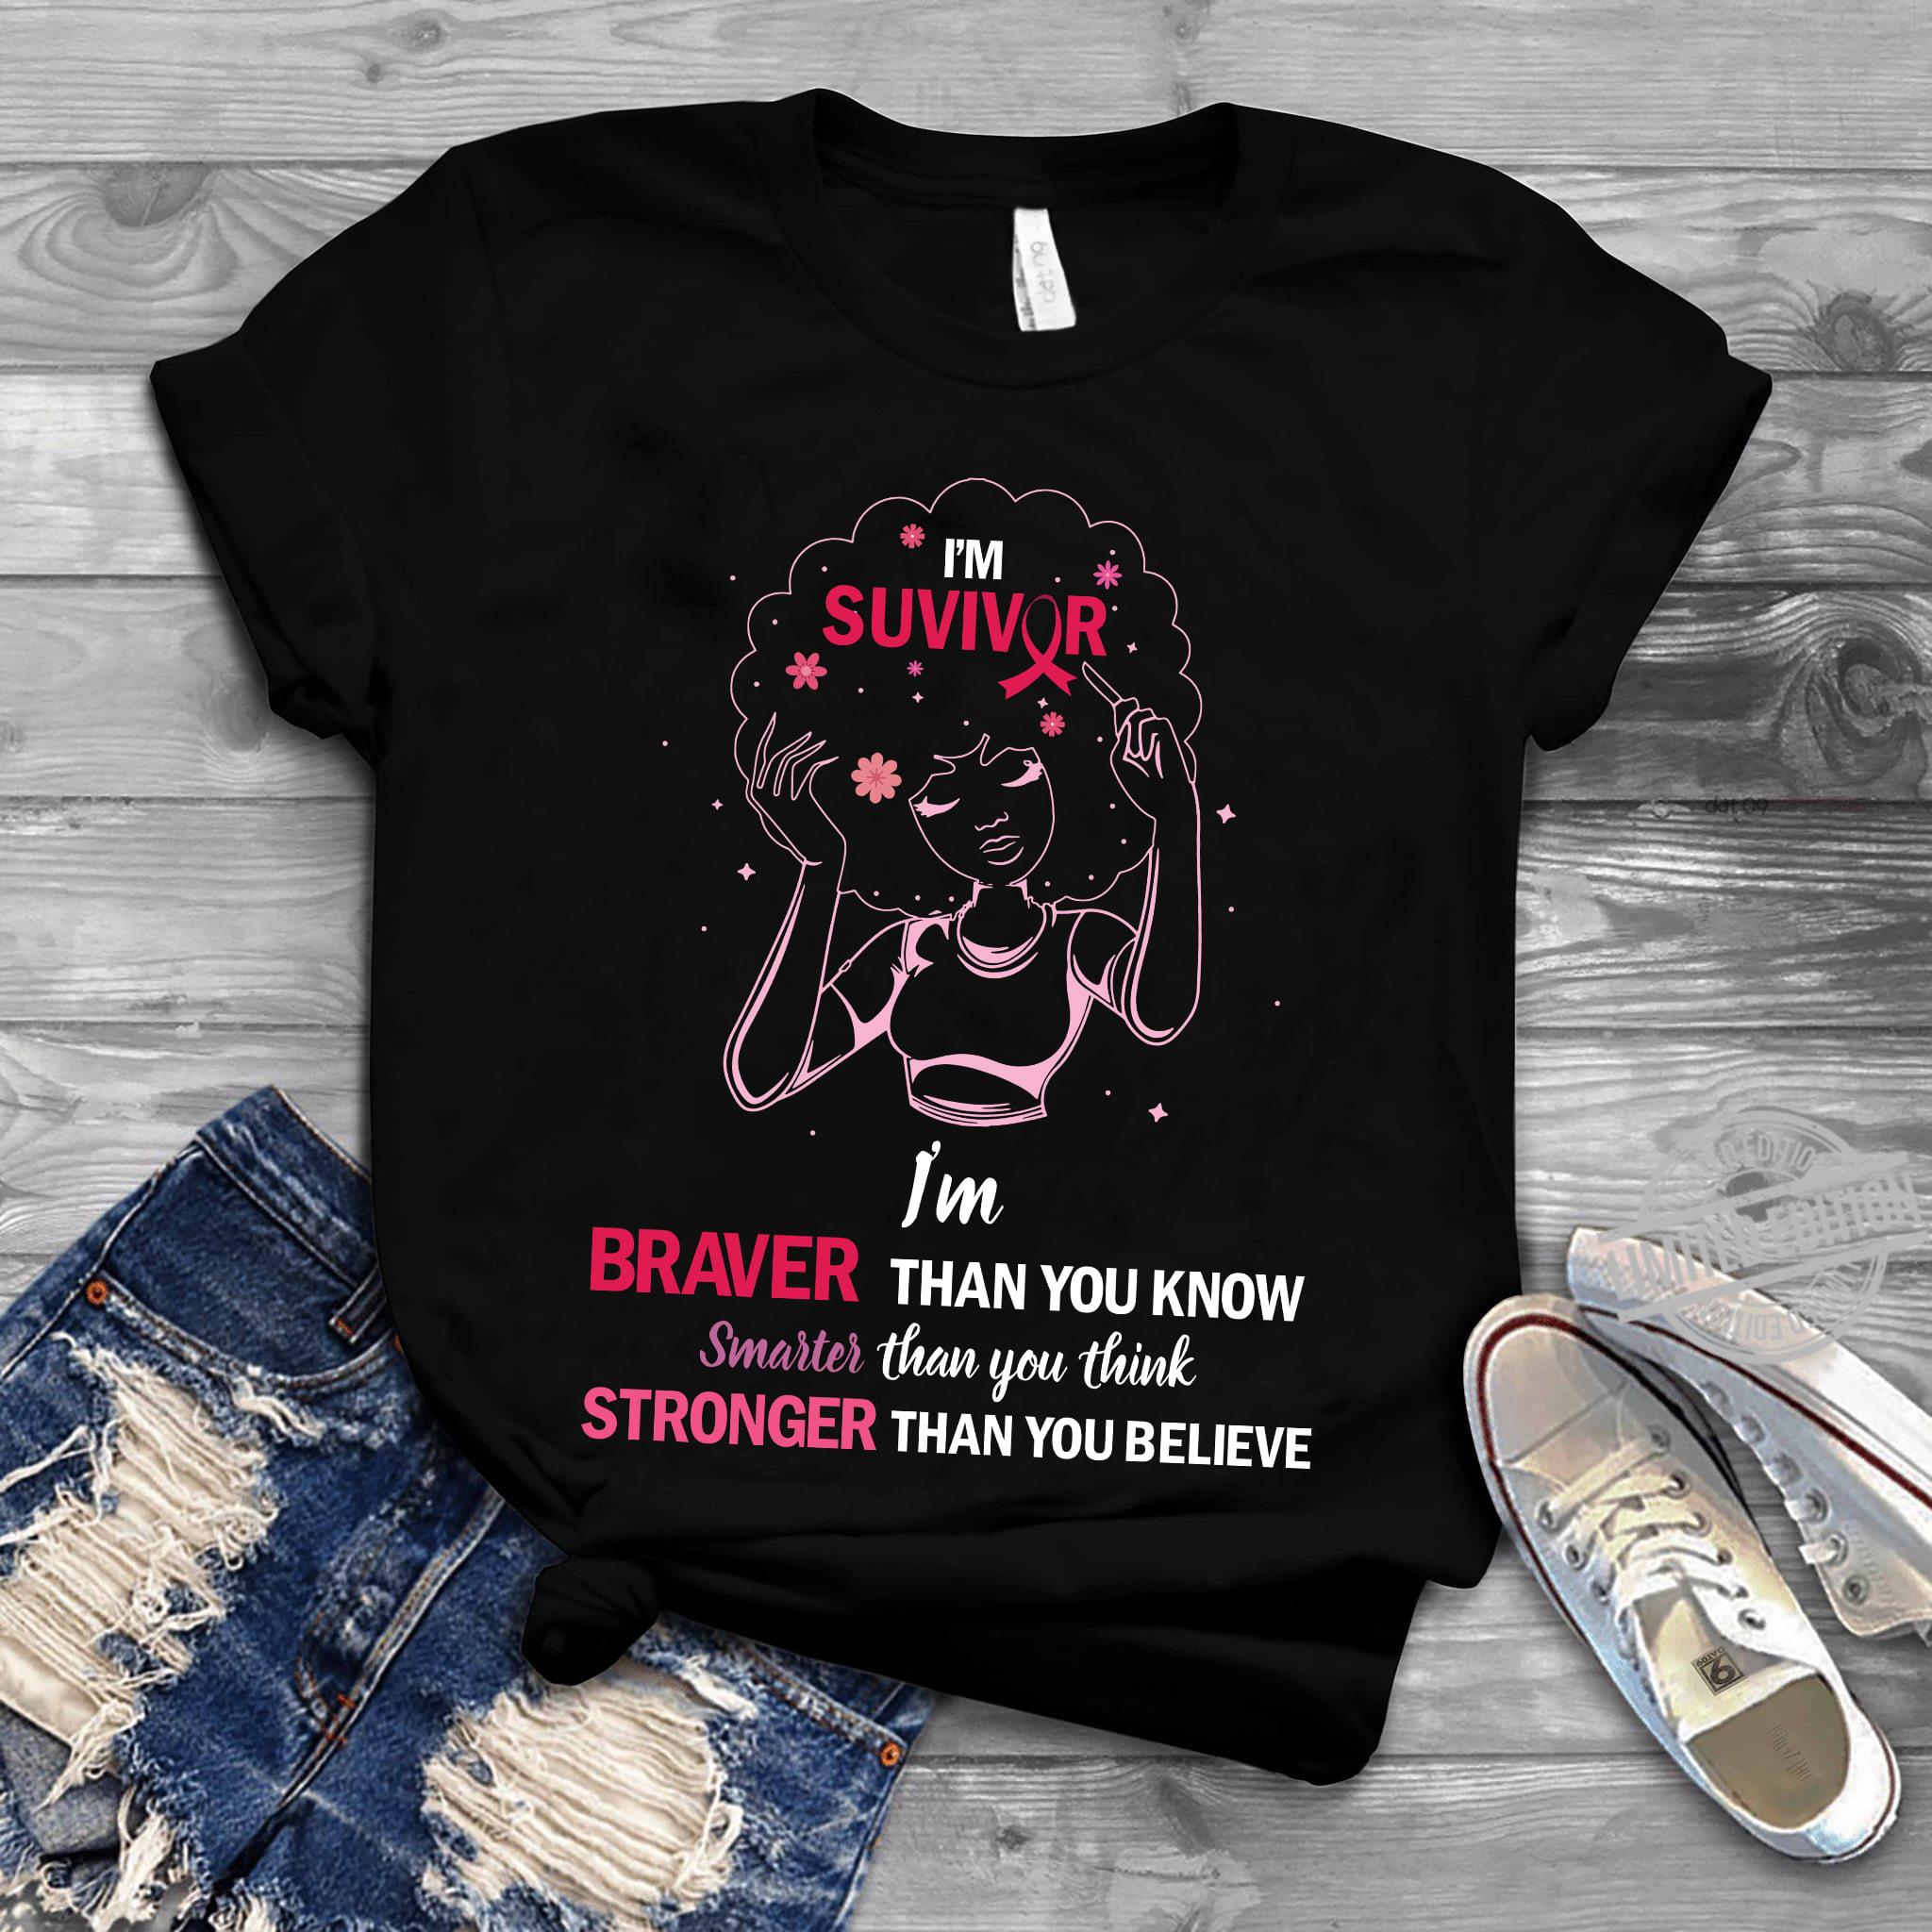 Breast Cancer Survivor Girl - I'm braver than you know smarter than you think stronger than you believe